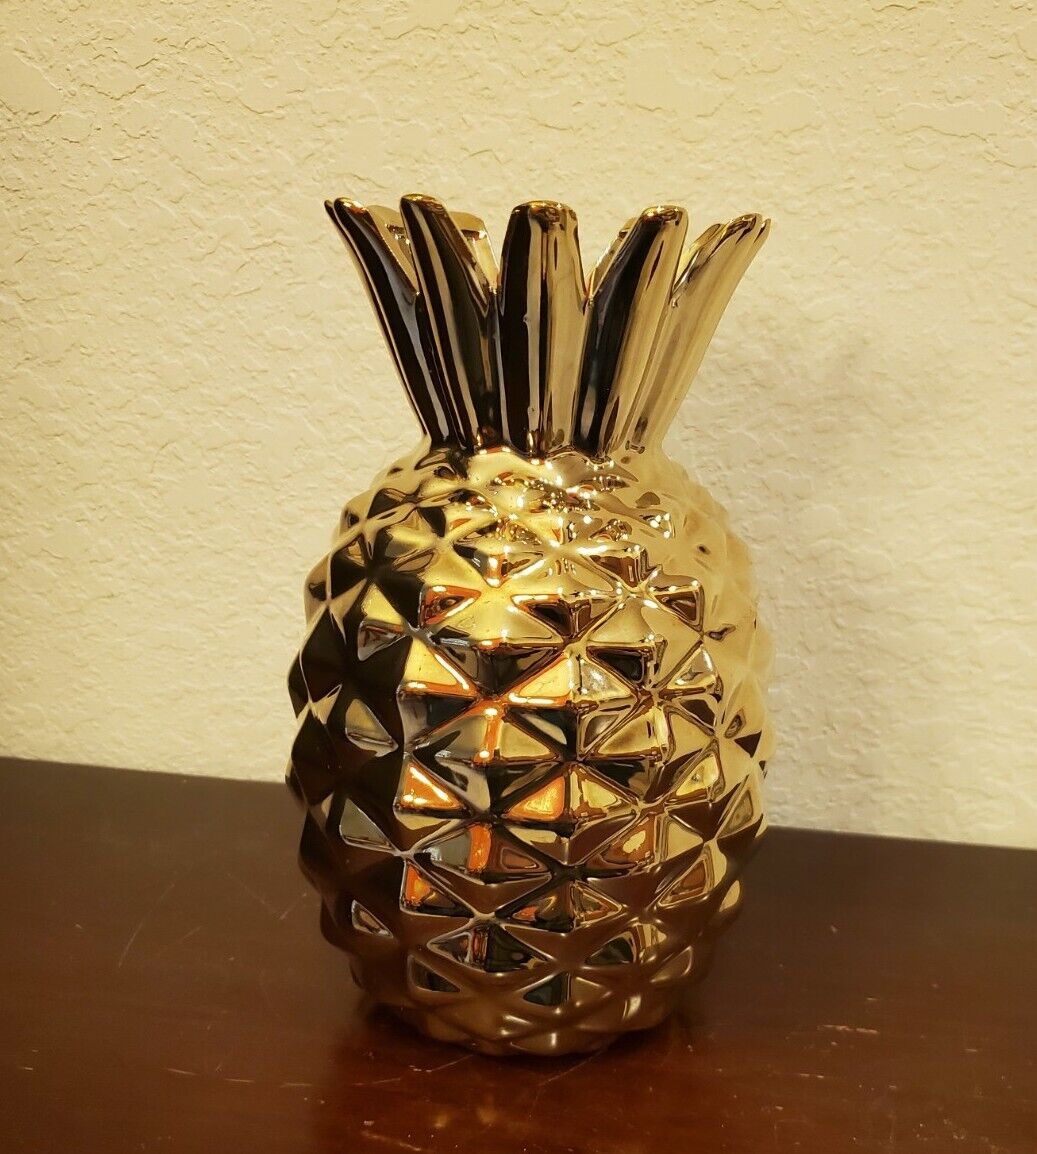 Gold Pineapple Vase Shinny Mirrored Finish 8.5 Inches Tall